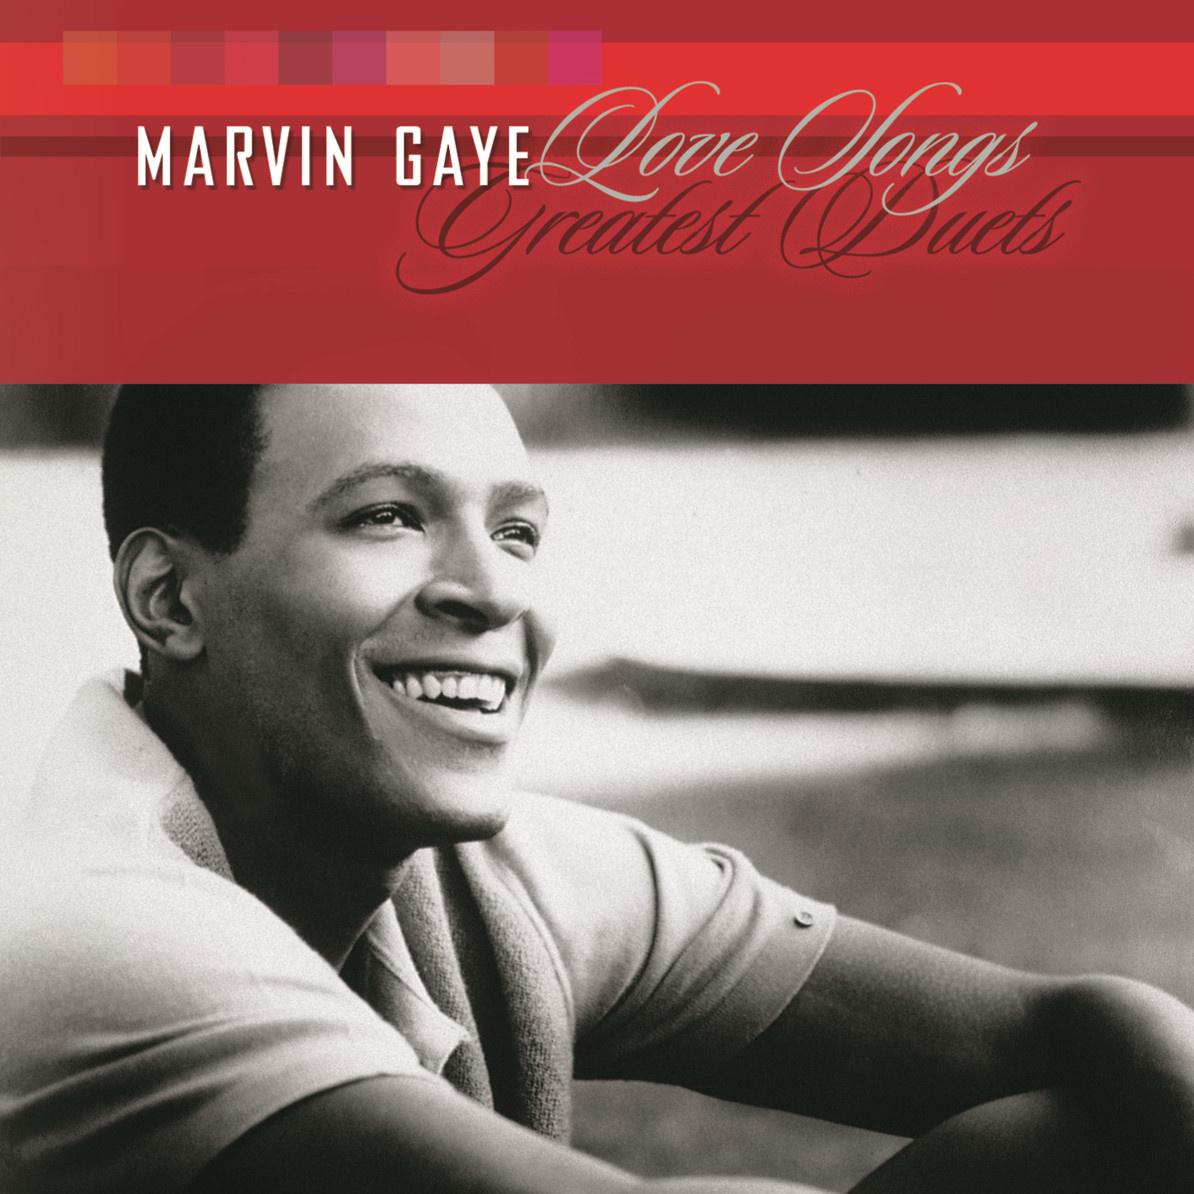 Marvin Gaye - I Want You 'Round (Single Version)